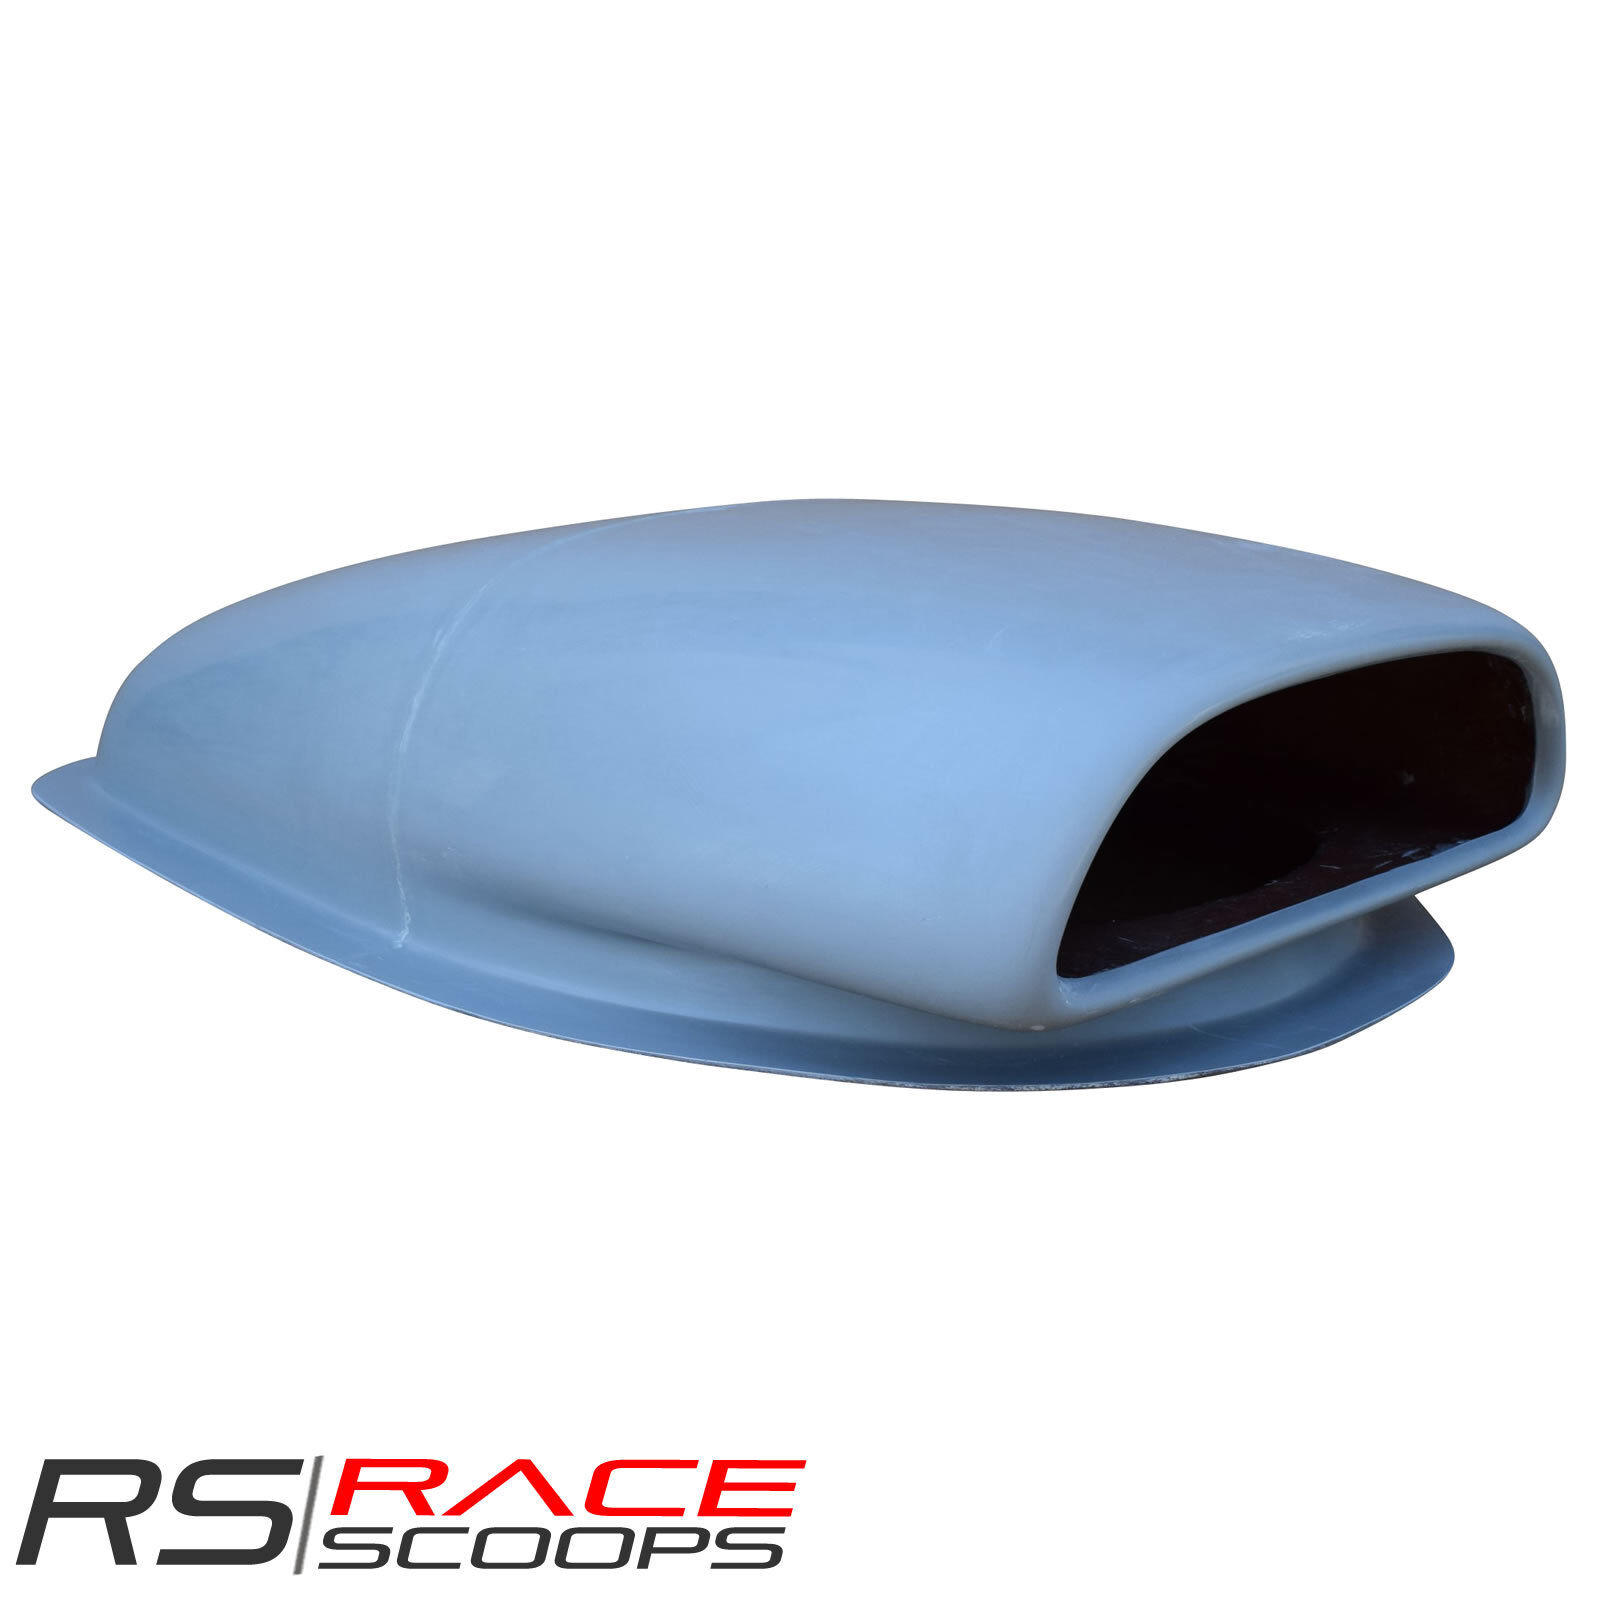 Aero  Hood Scoop  33 L x 18 W x 7 H NHRA New Drag Dragster induct317